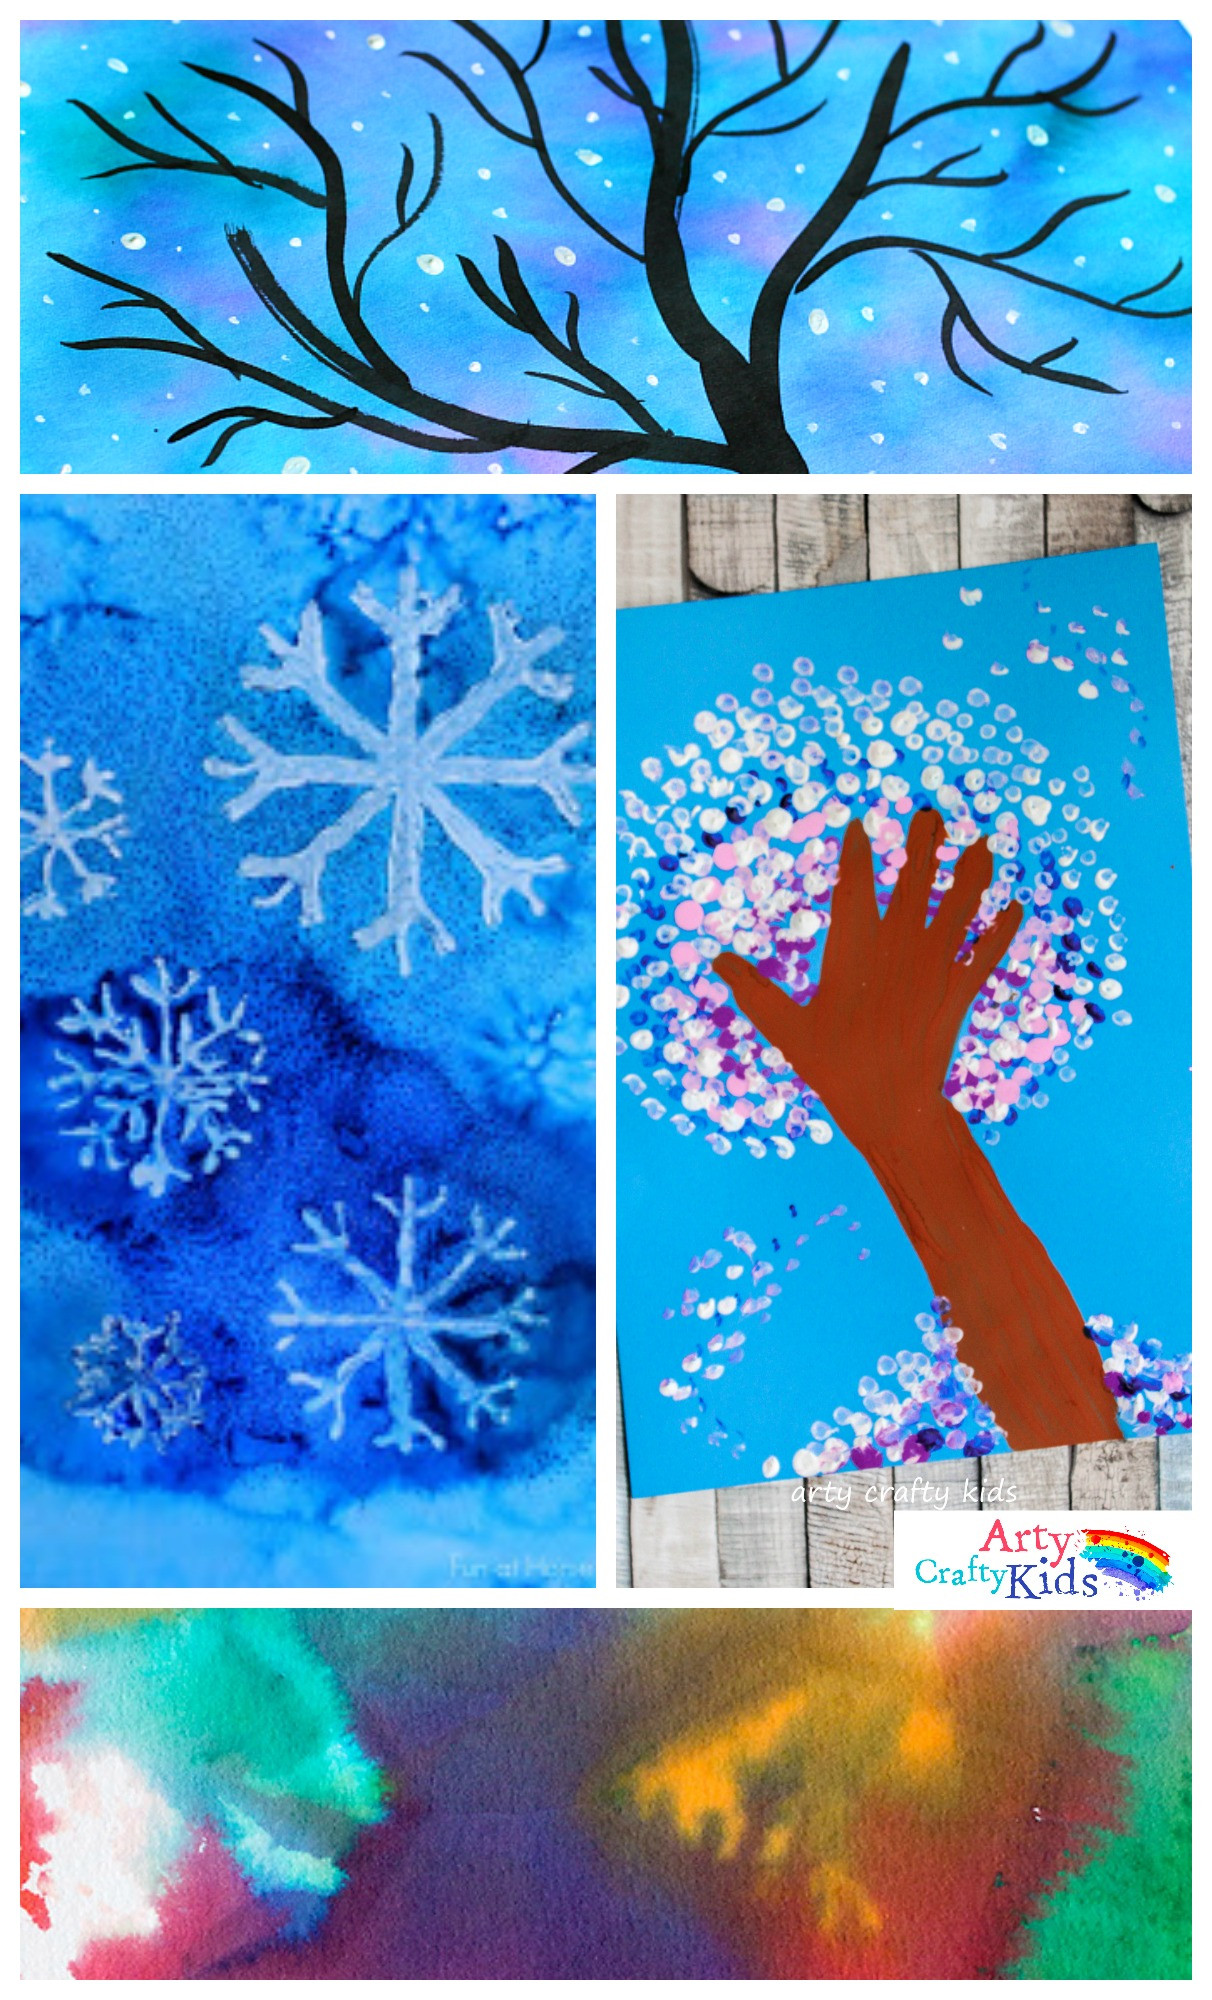 Toddler Art And Craft Projects
 14 Wonderful Winter Art Projects for Kids Arty Crafty Kids